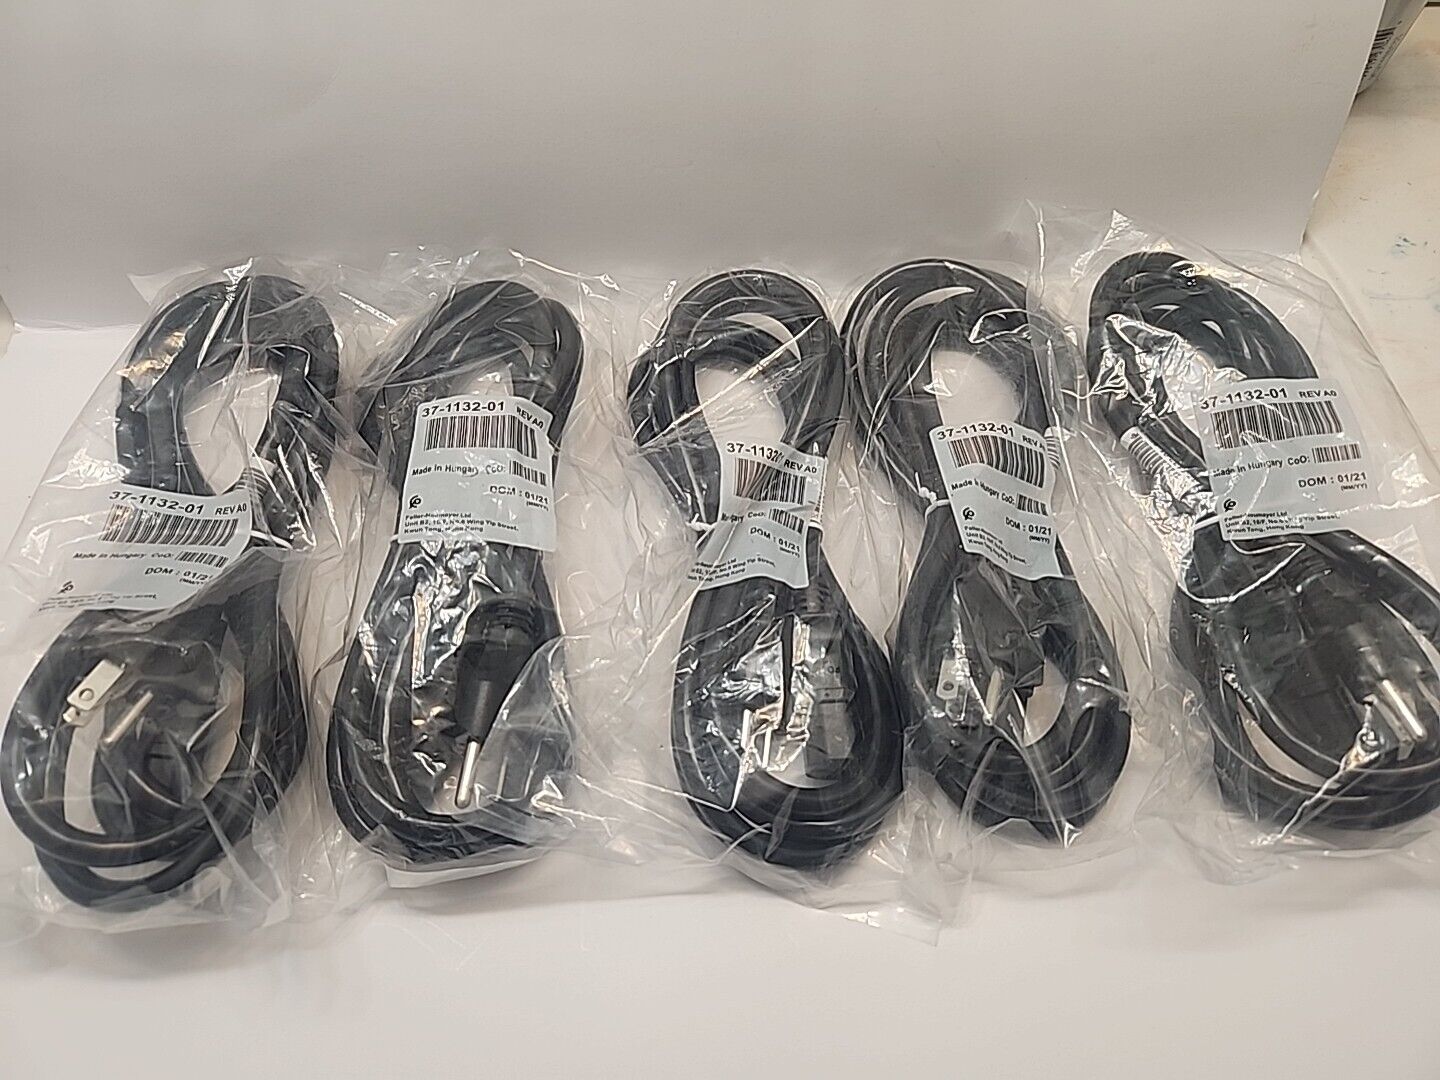 5 COUNT BRAND NEW Cisco 37-1132-01 Notched Power Cord 13A 8ft 3 x 16awg